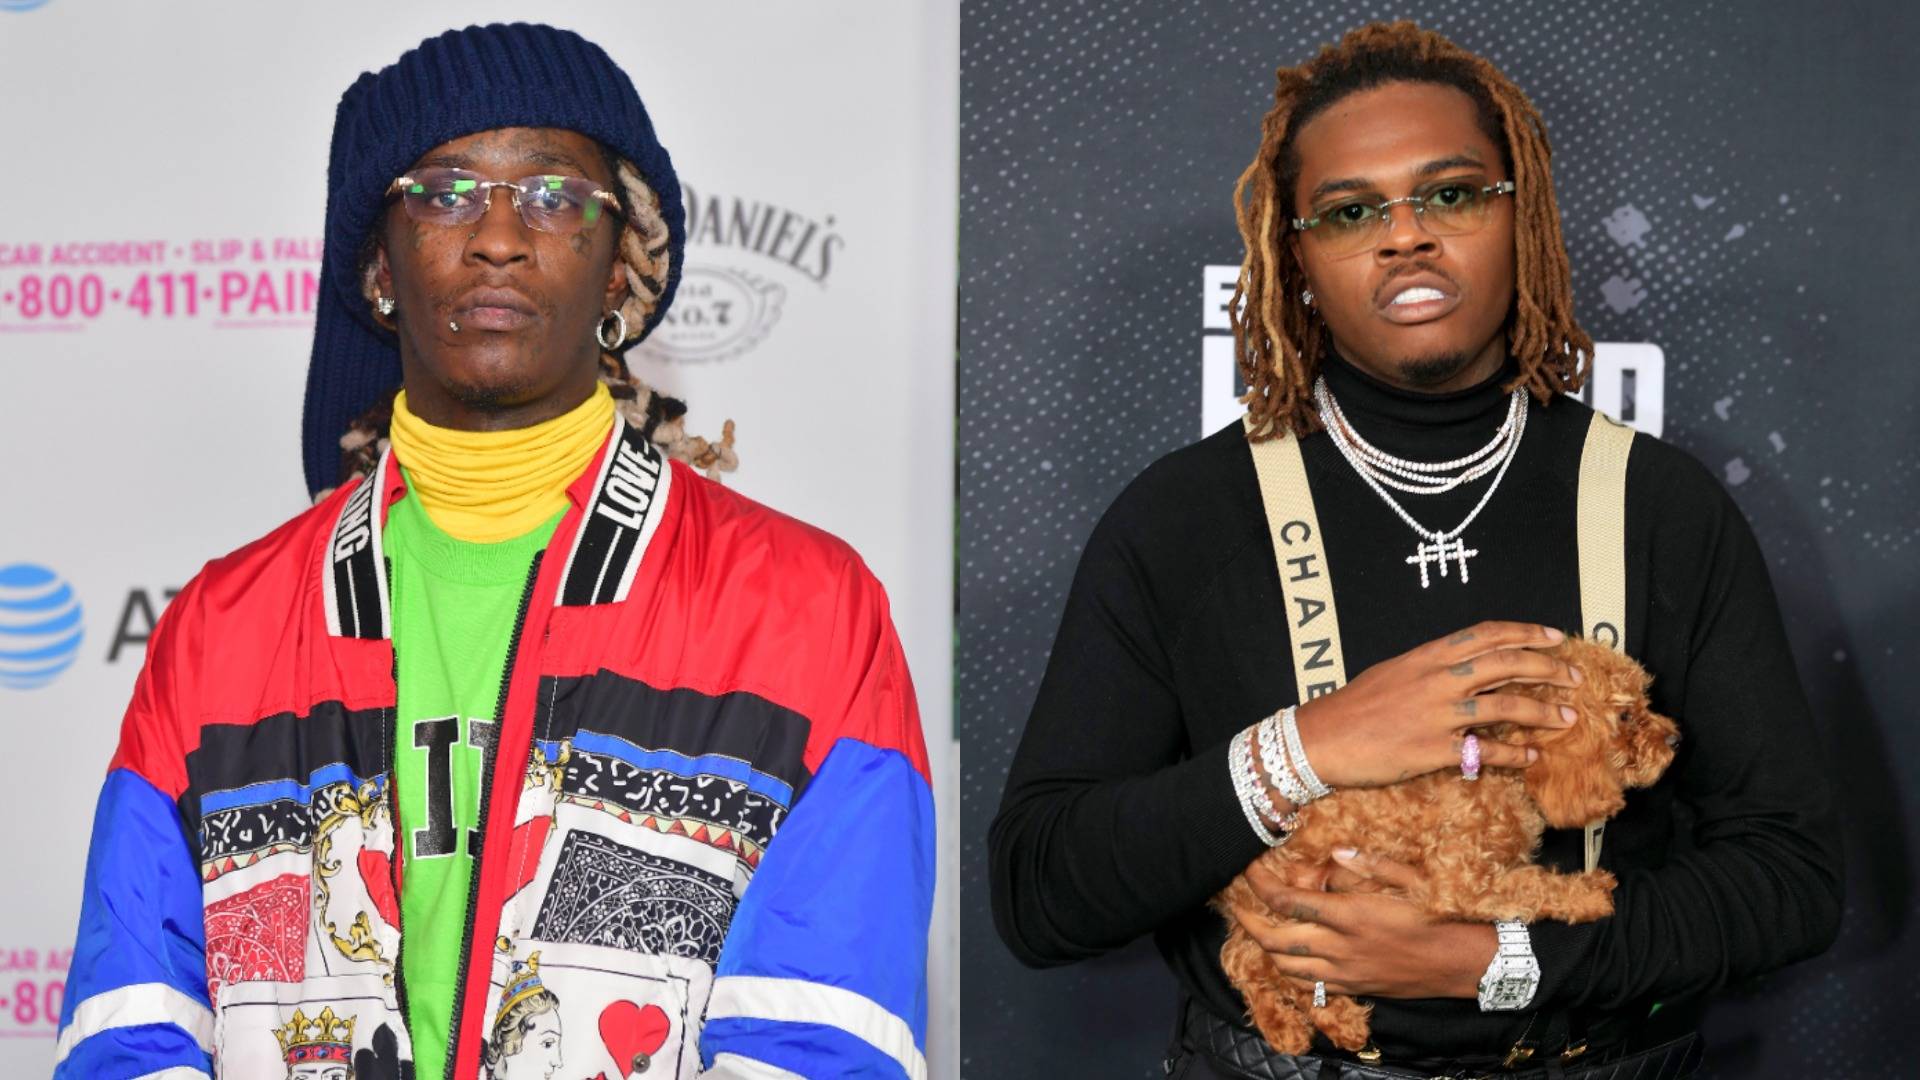 Gunna Returns to the Studio, Shares Support for Young Thug - Rap-Up